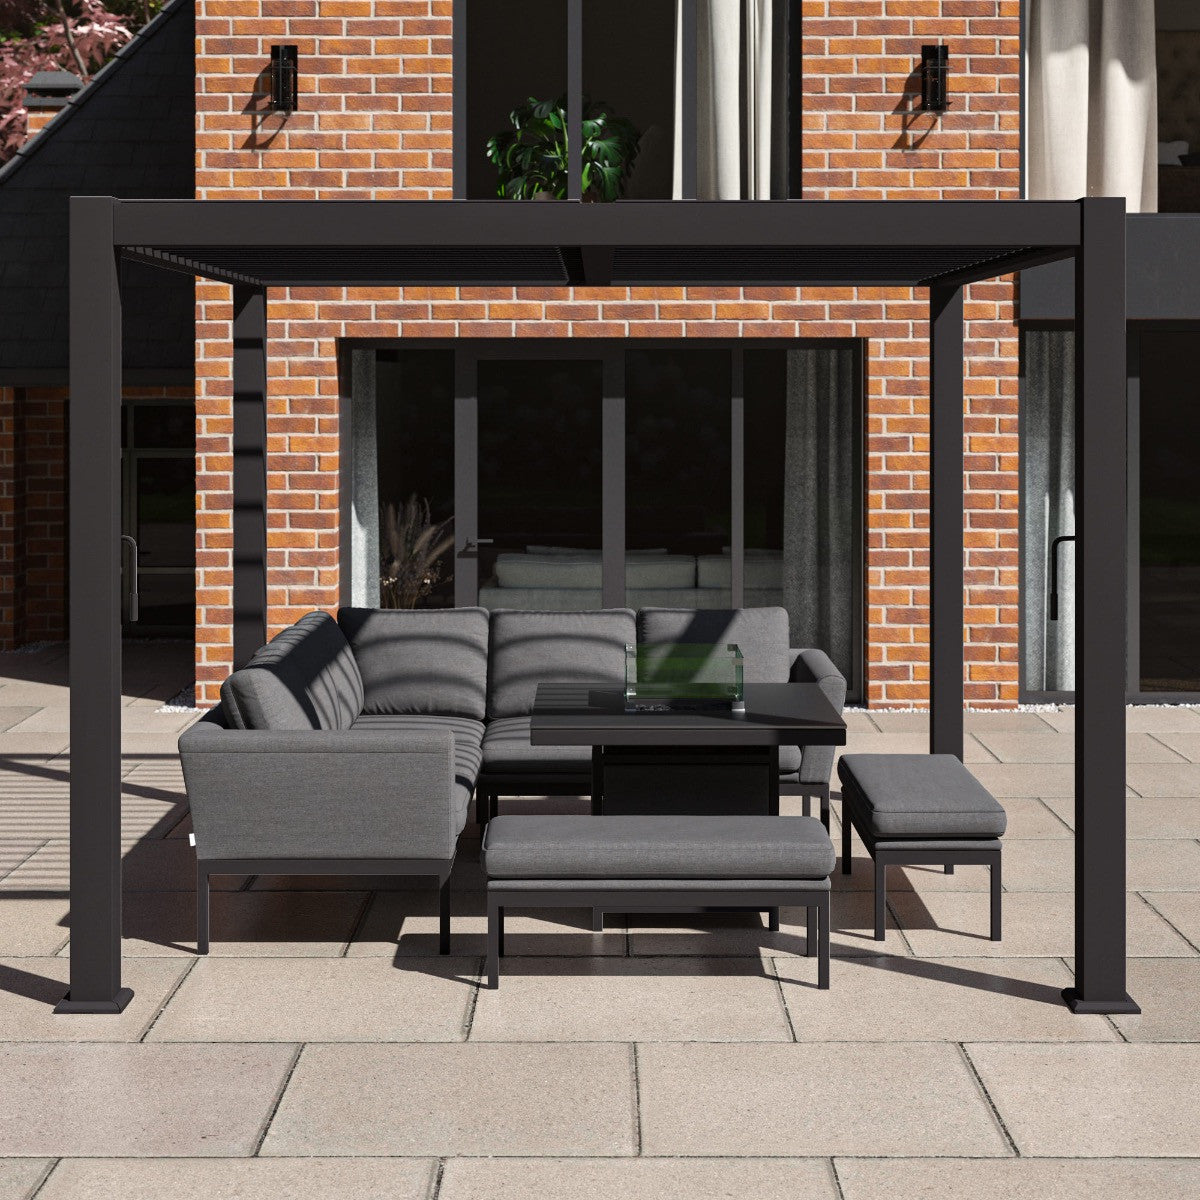 Maze Como Pergola Aluminium Square 30x30 Frame Only From Other Side-Better Bed Company